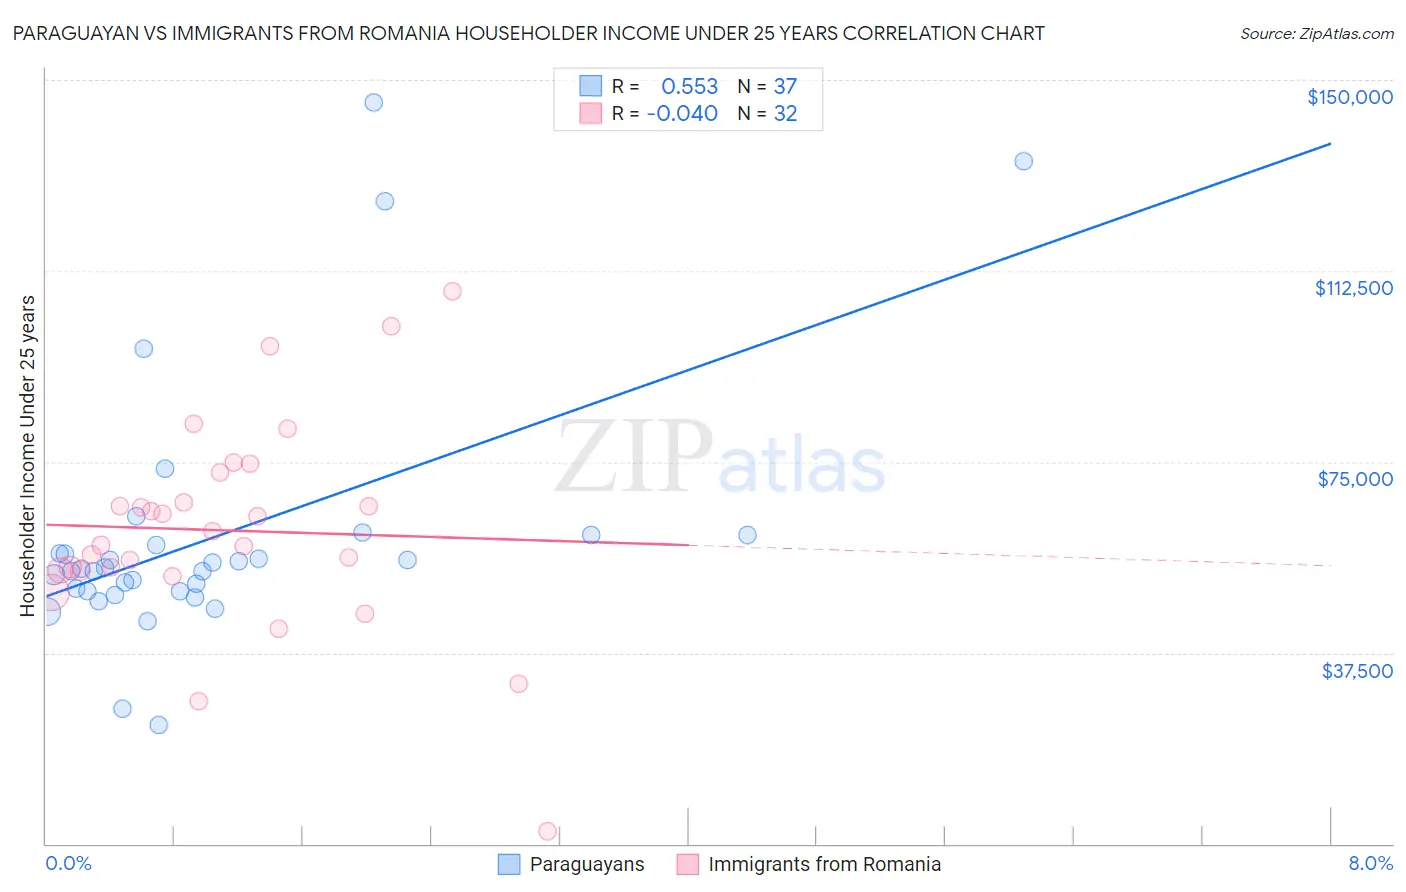 Paraguayan vs Immigrants from Romania Householder Income Under 25 years